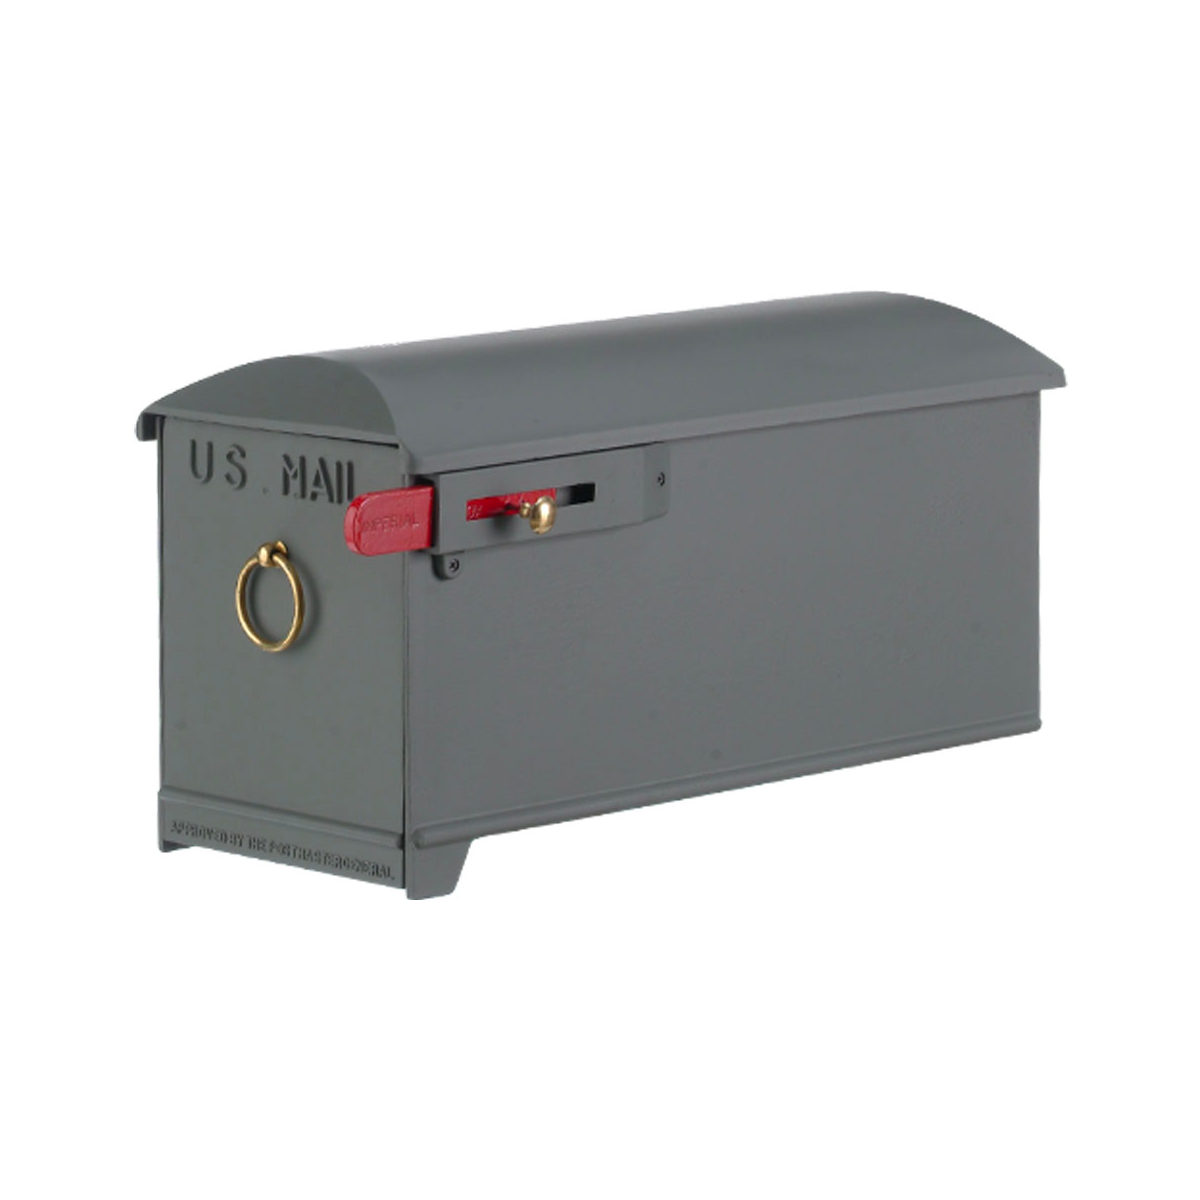 Imperial Mailbox 0 – Plain (mailbox only) Product Image